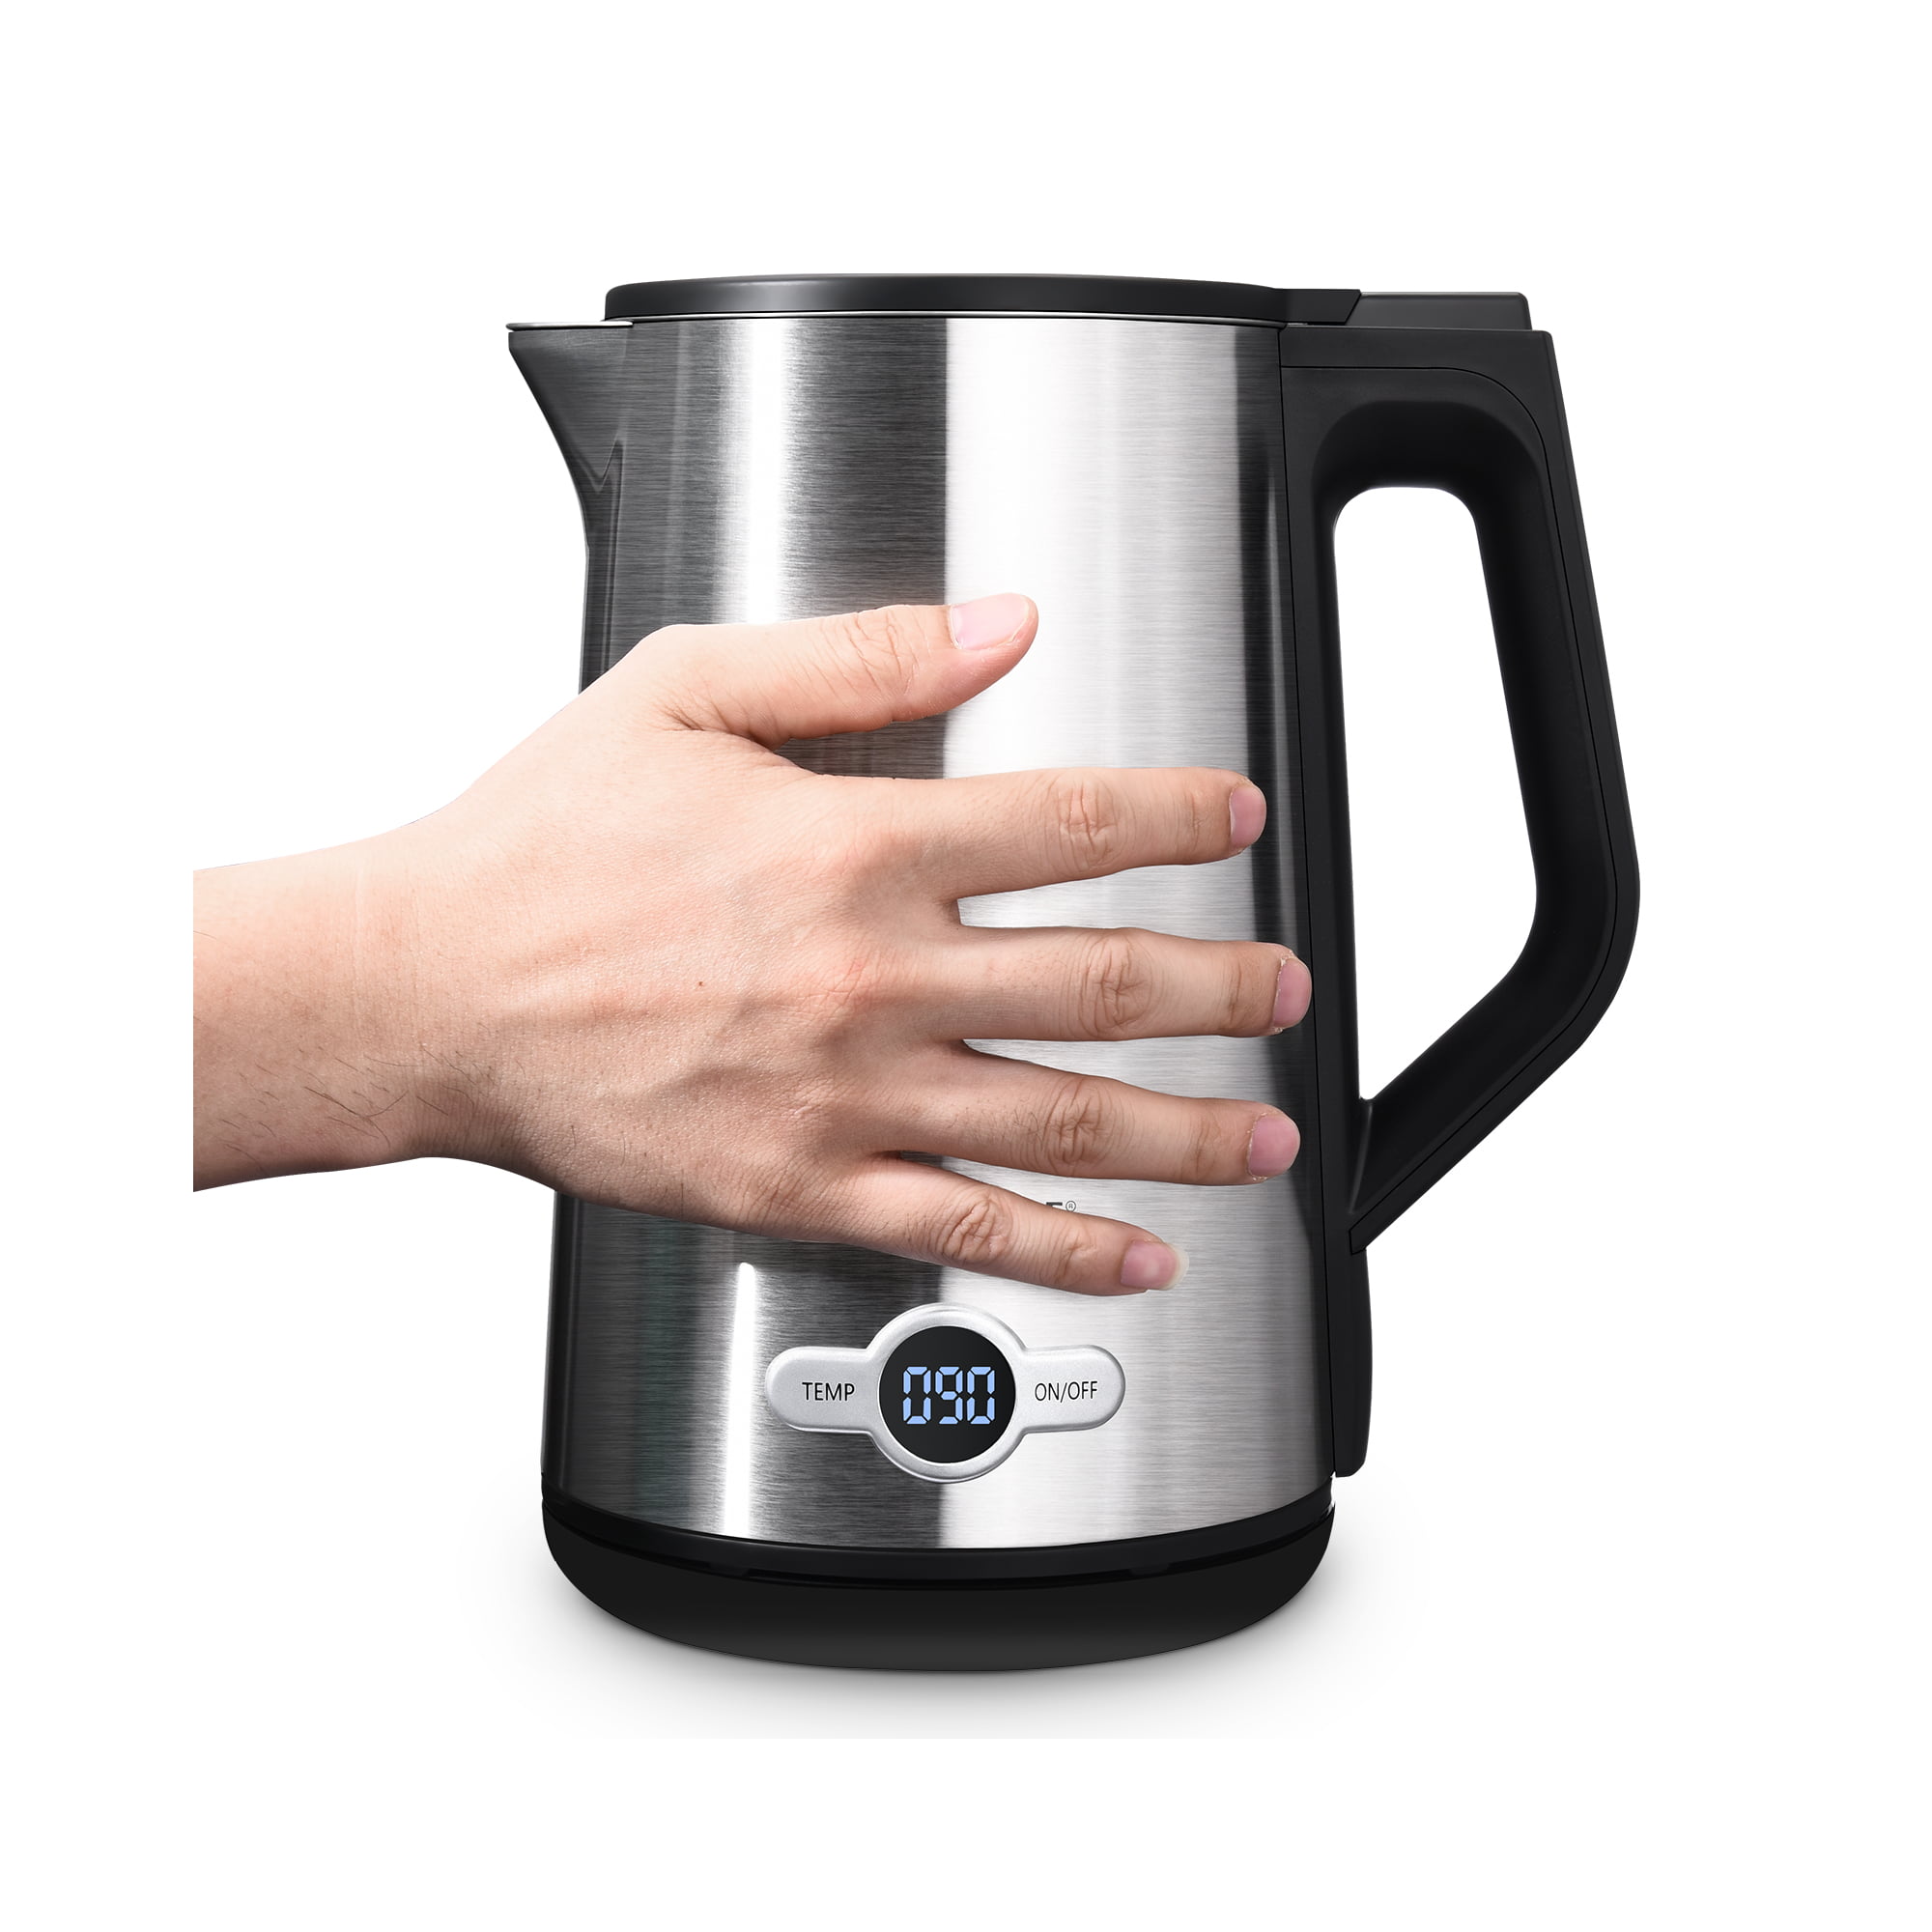 Farberware 1.7 Liter Electric Kettle, Double Wall Stainless Steel and Black